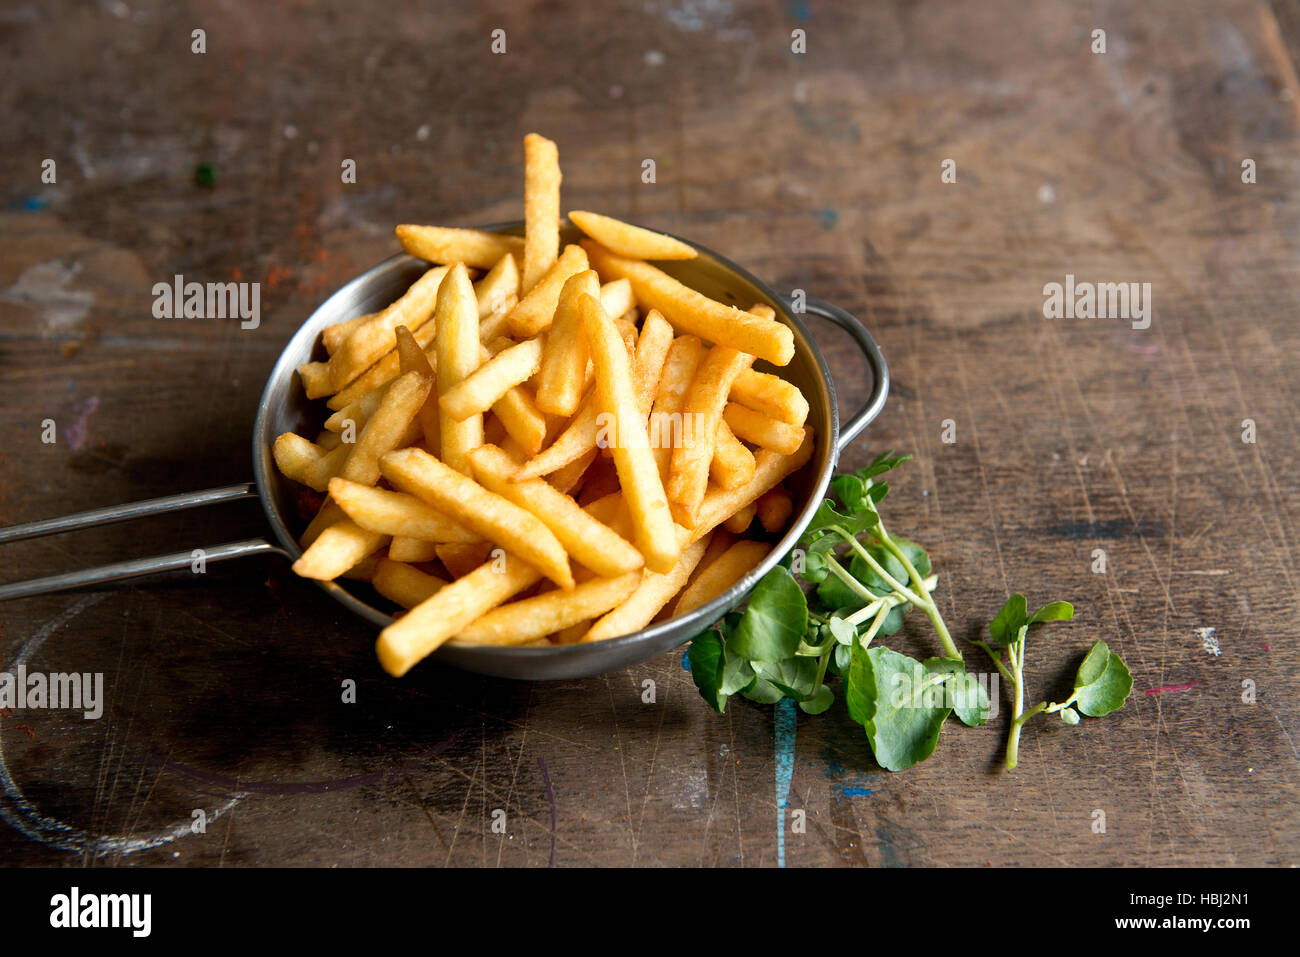 french fries Stock Photo